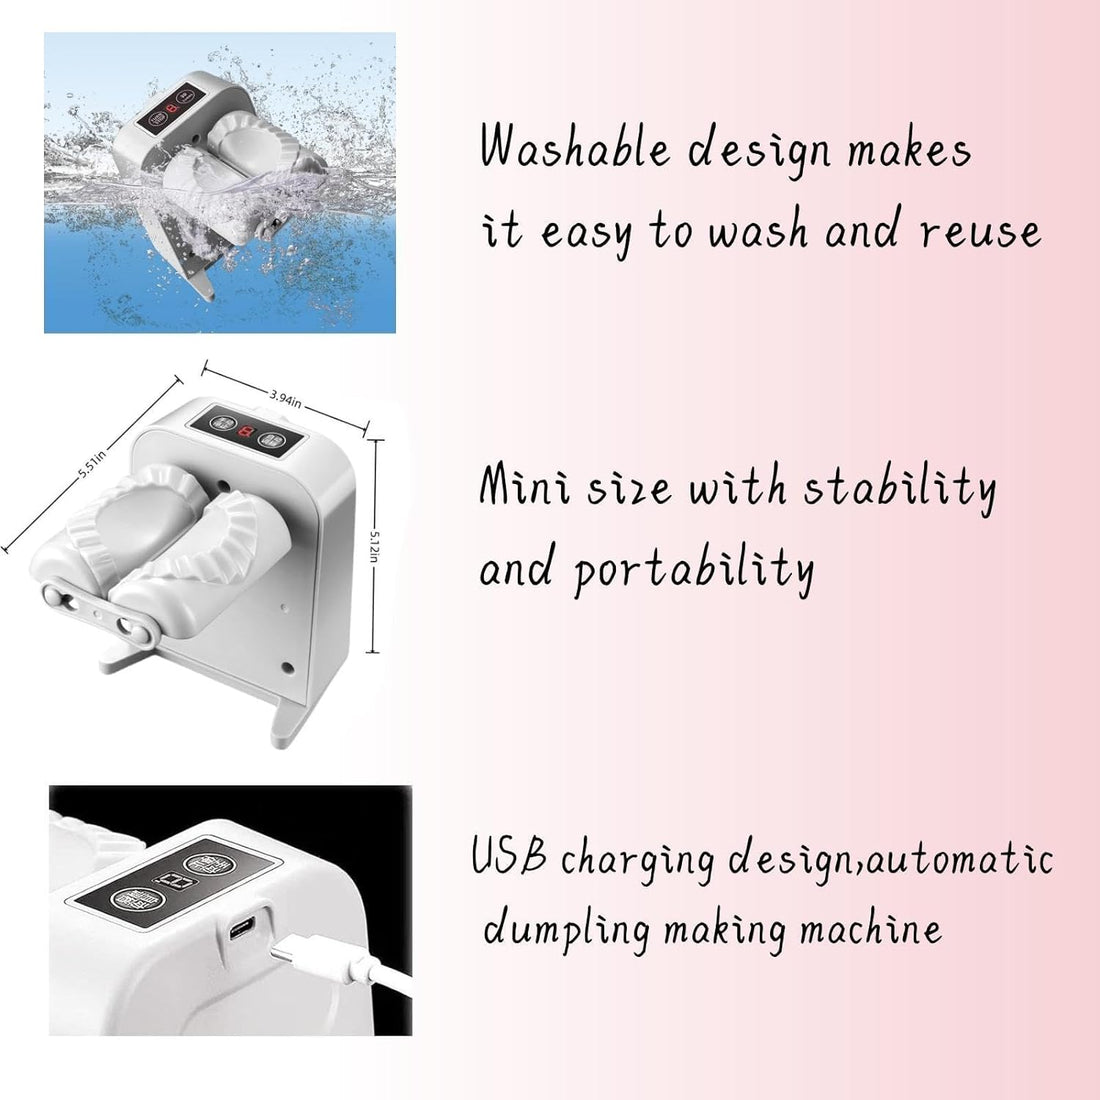 New Automatic and Manual 2 Modes Electric Dumpling Maker Machine with Kneading Pad and 2 Dough Pressing Tools, Easy and Rapid Forming Dumpling Maker Mold (1 pc) (1 pc)